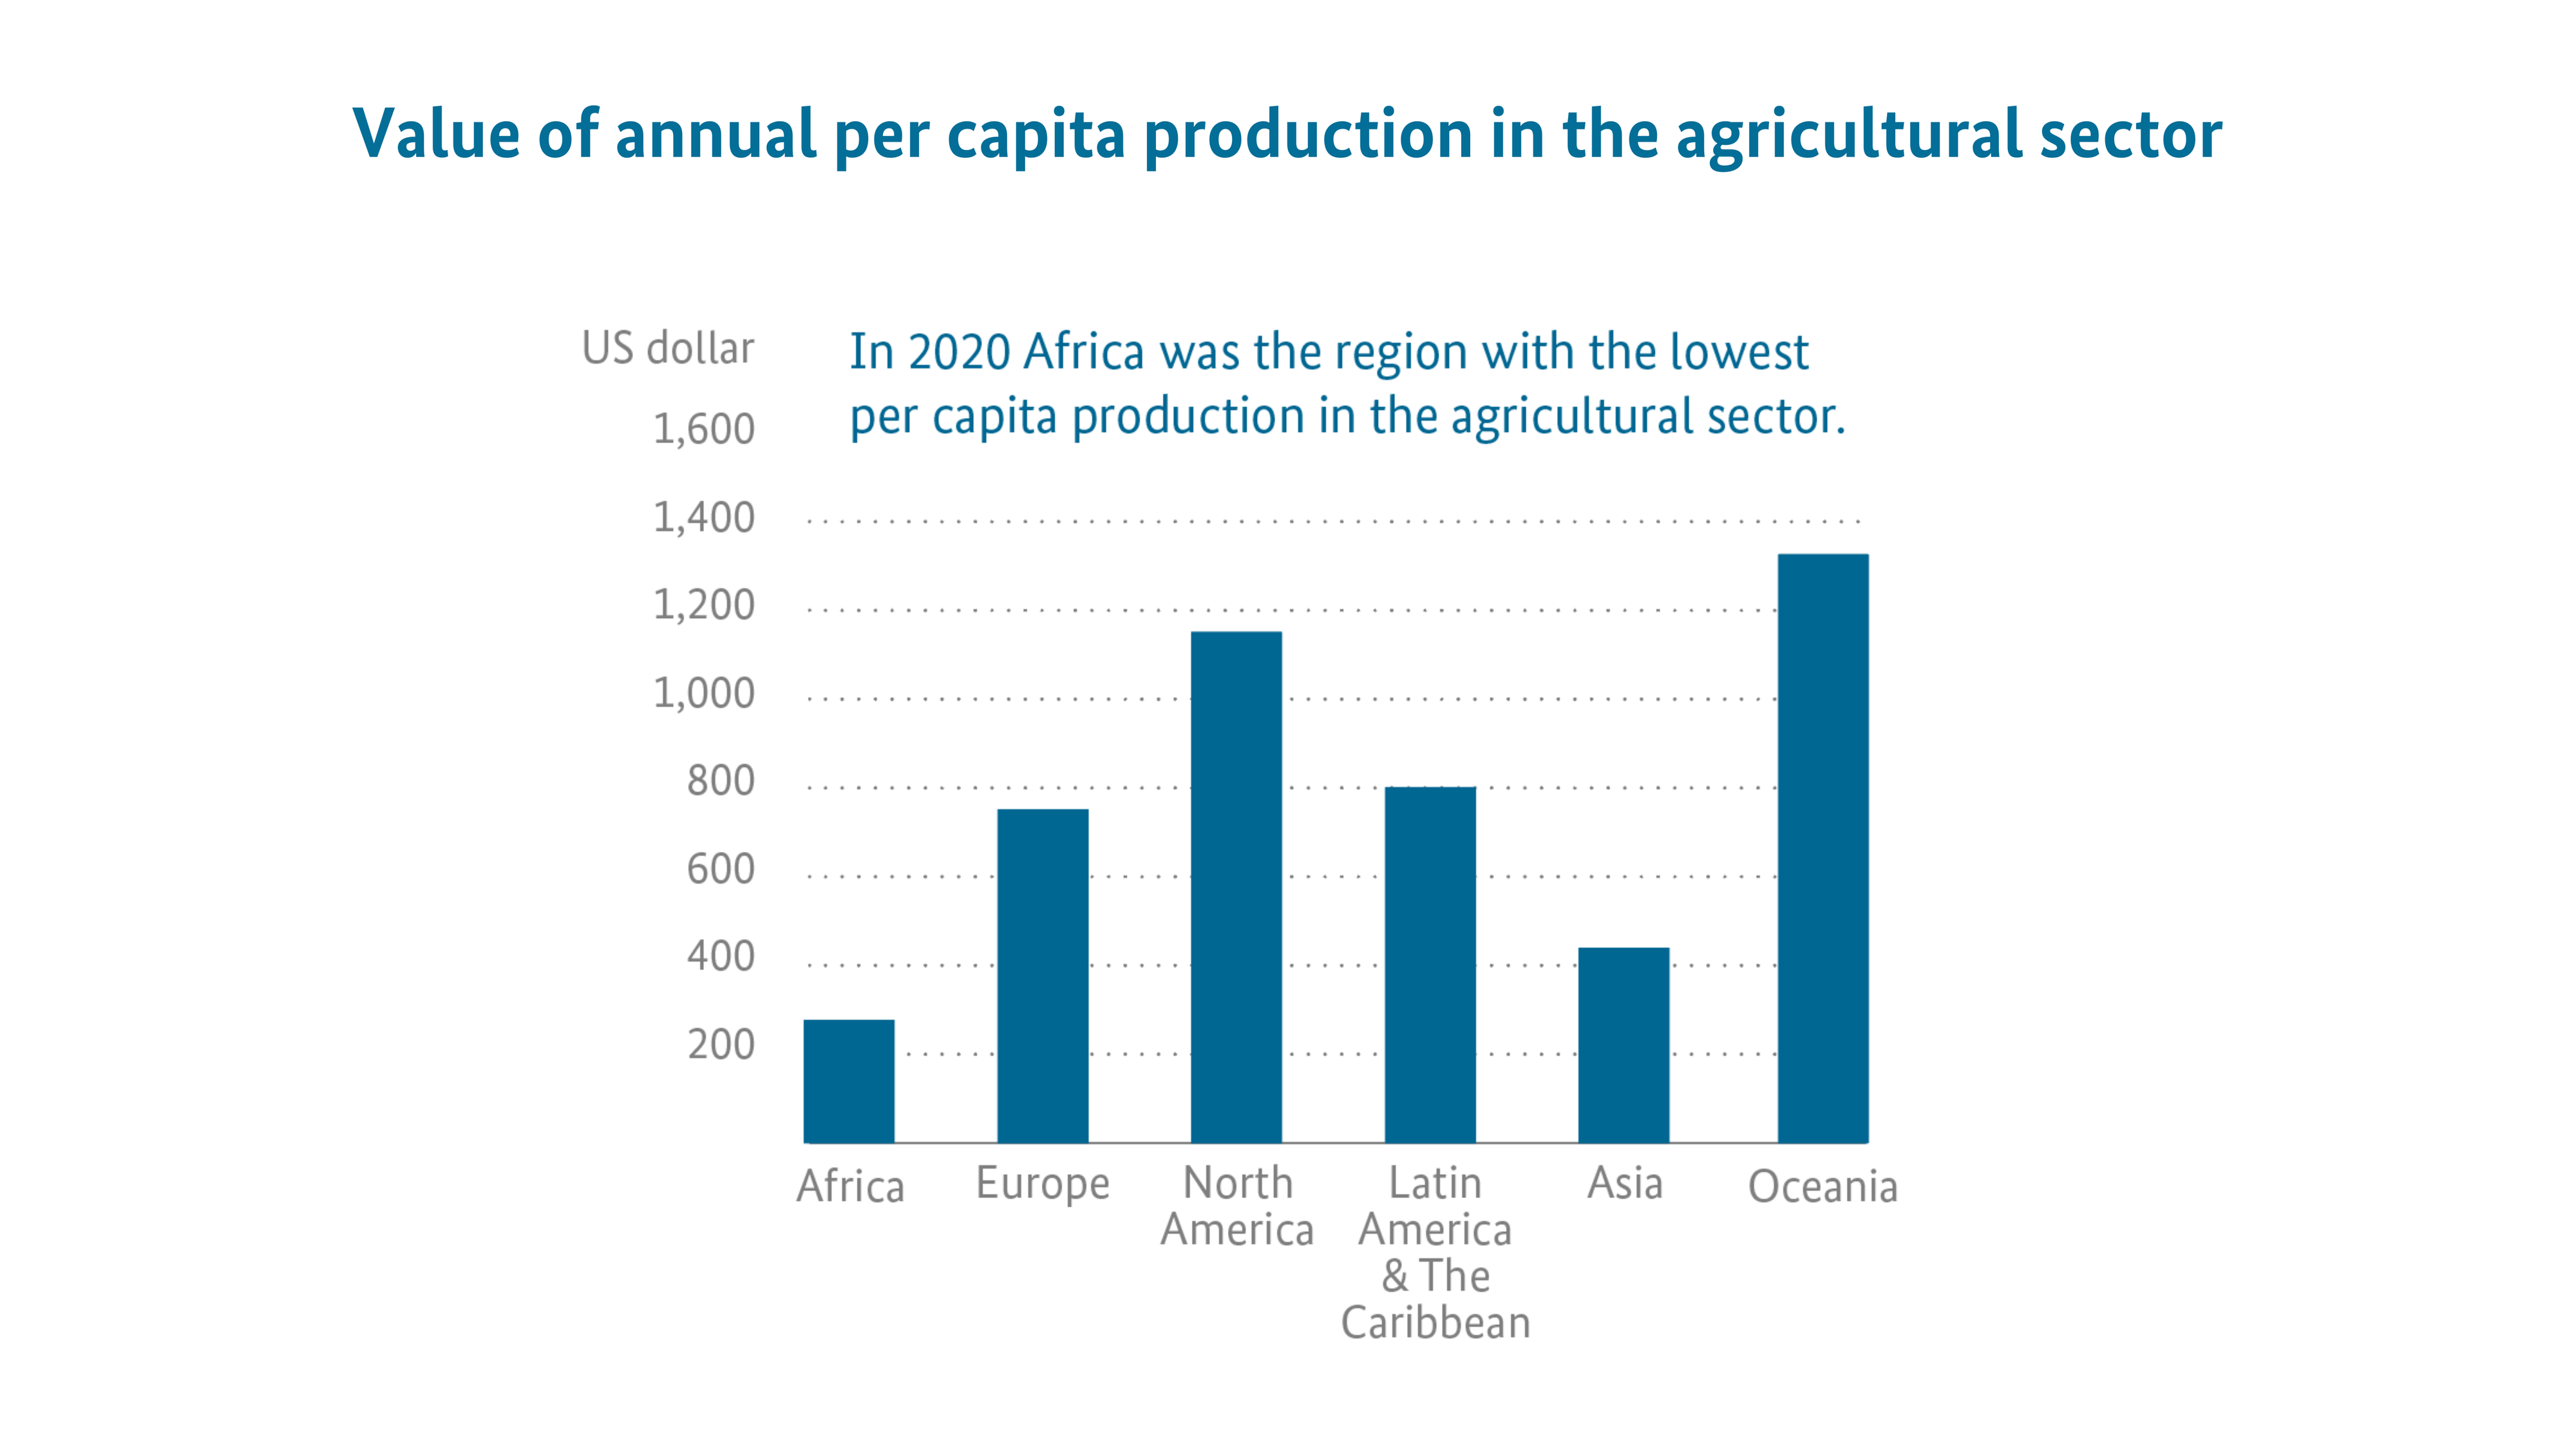 Value of annual per capita production in the agricultural sector: In 2020 Africa was the region with the lowest per capita production in the agricultural sector.